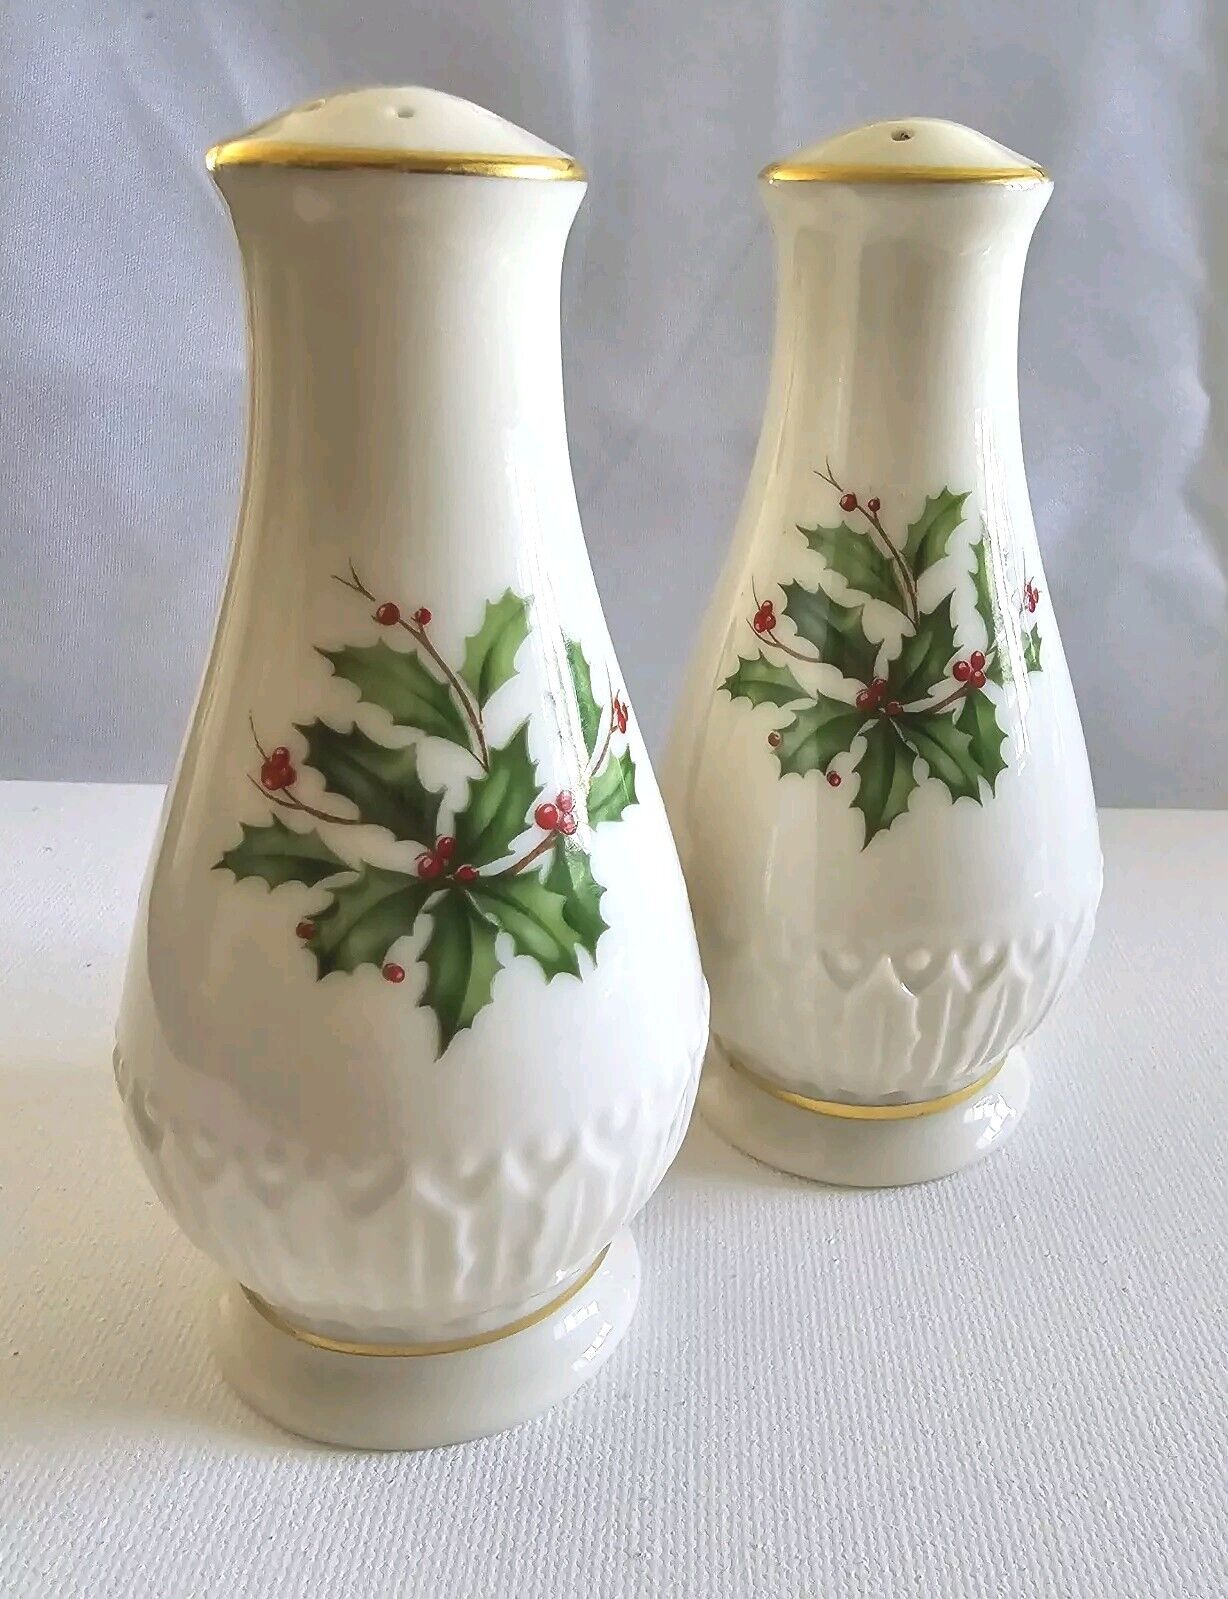 Lenox Holiday Dimension Christmas Sculpted Salt & Pepper Shakers With Gold Trim